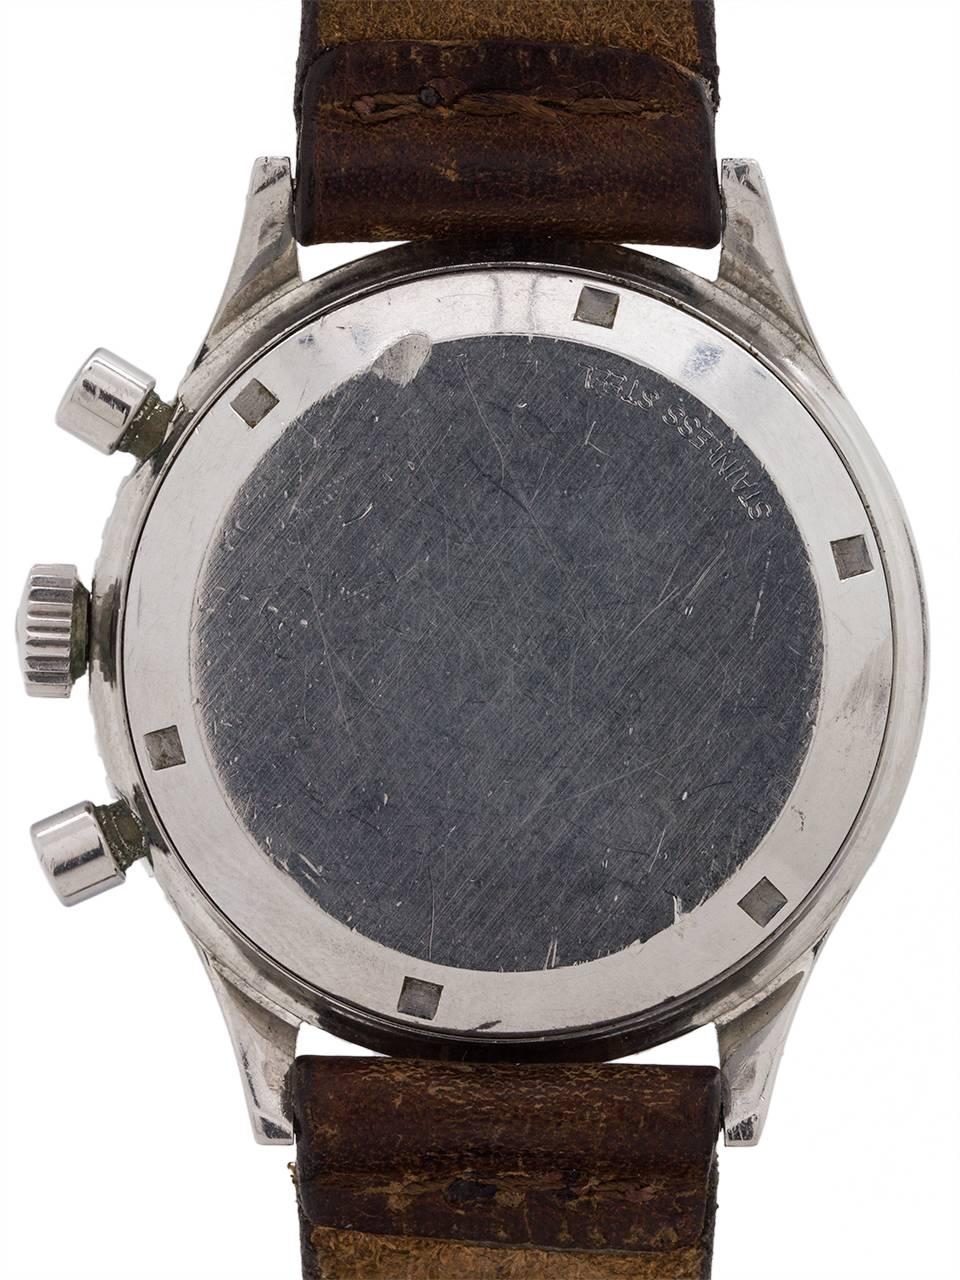 Men's Wittnauer Stainless Steel Professional Chronograph Manual Wristwatch circa 1960s For Sale